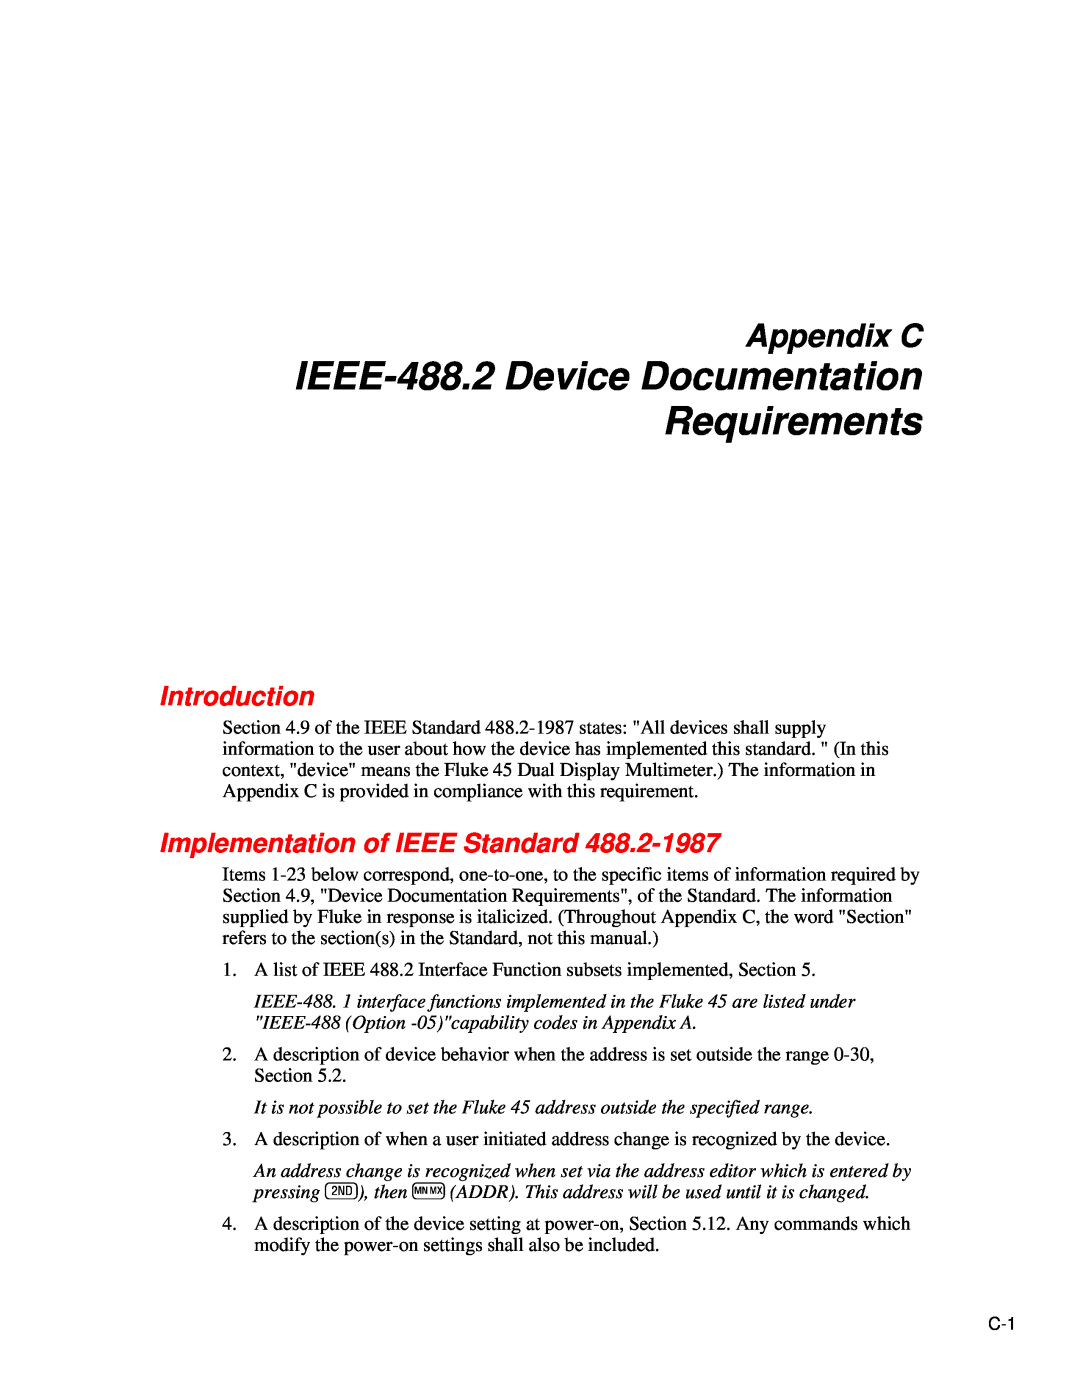 Fluke 45 user manual IEEE-488.2Device Documentation Requirements, Appendix C, Implementation of IEEE Standard, Introduction 